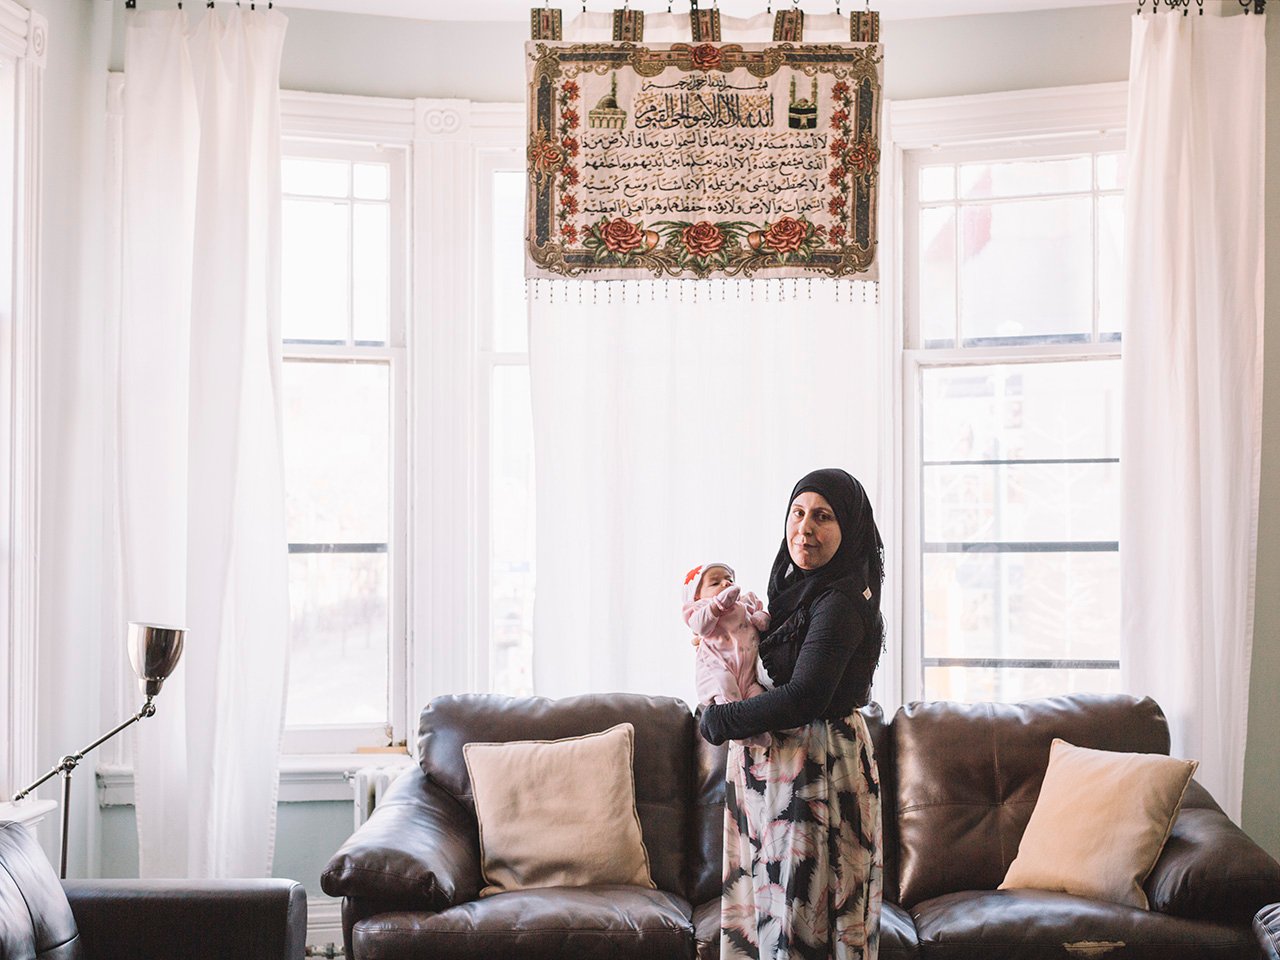 Zaka holds her new daughter in their apartment in Toronto